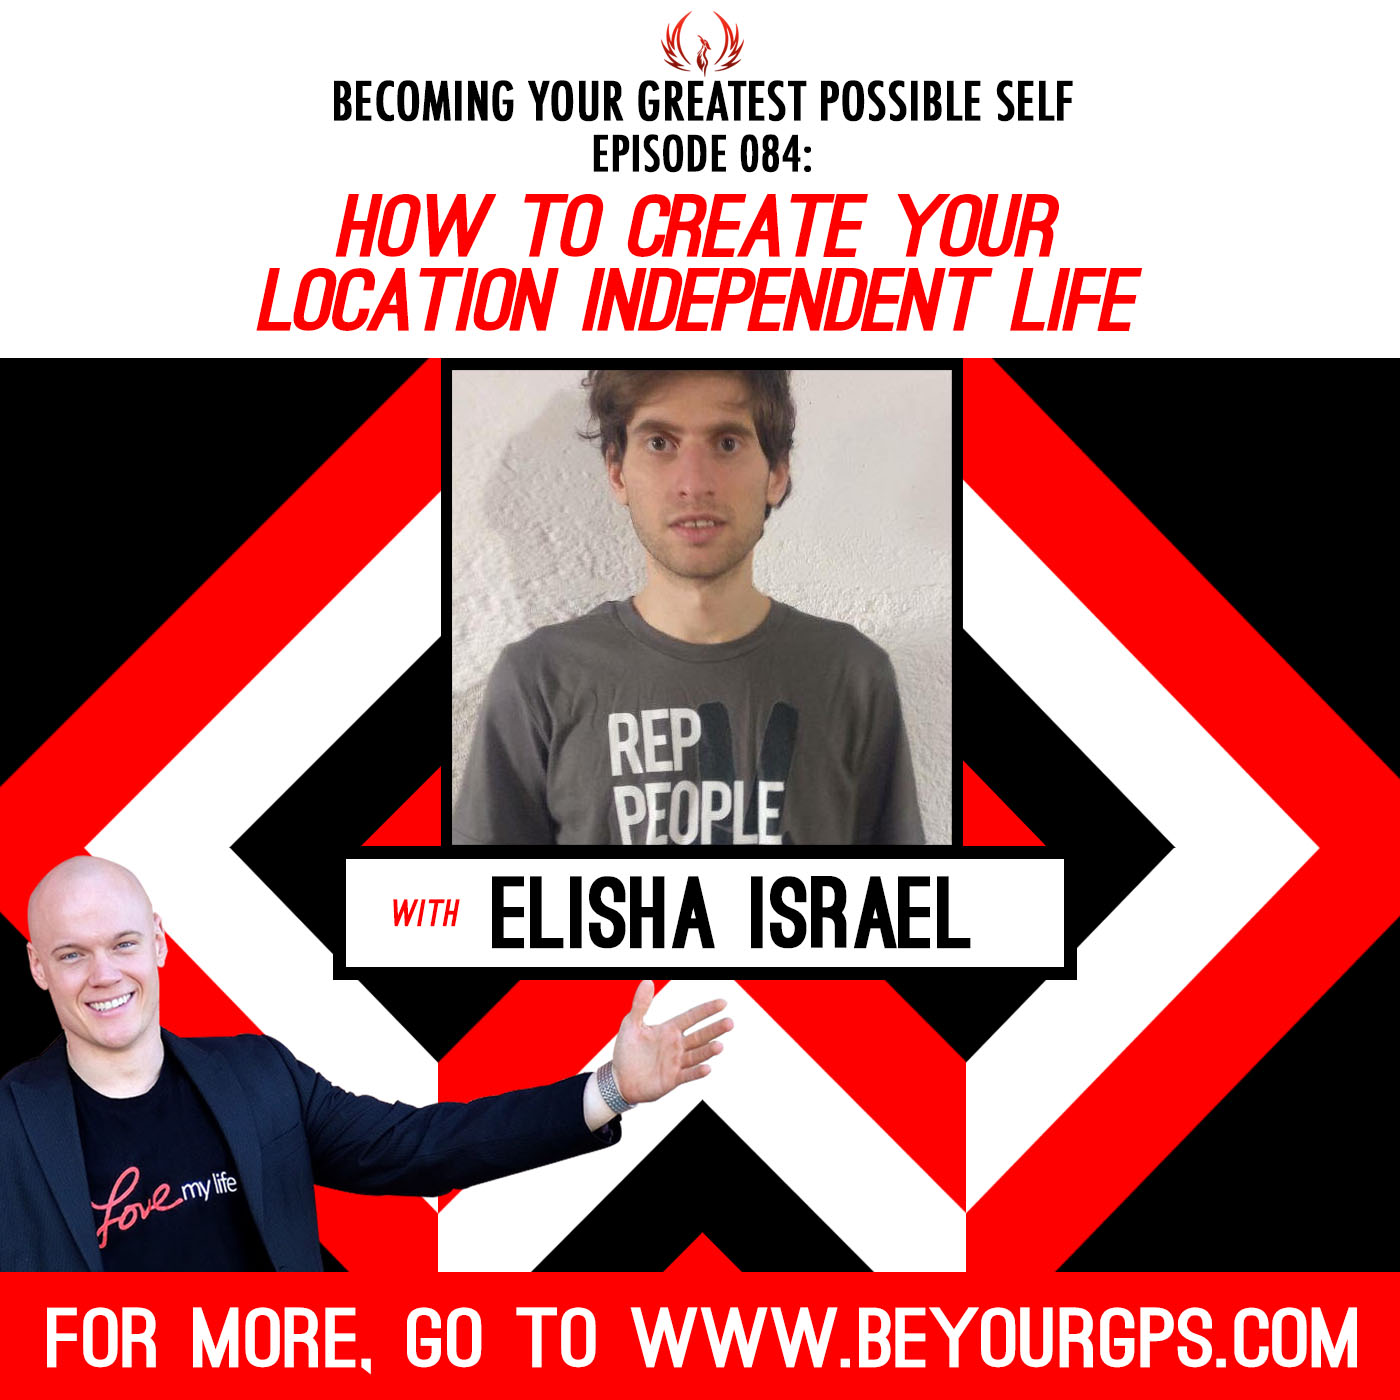 How To Create Your Location Independent Life with Elisha Israel